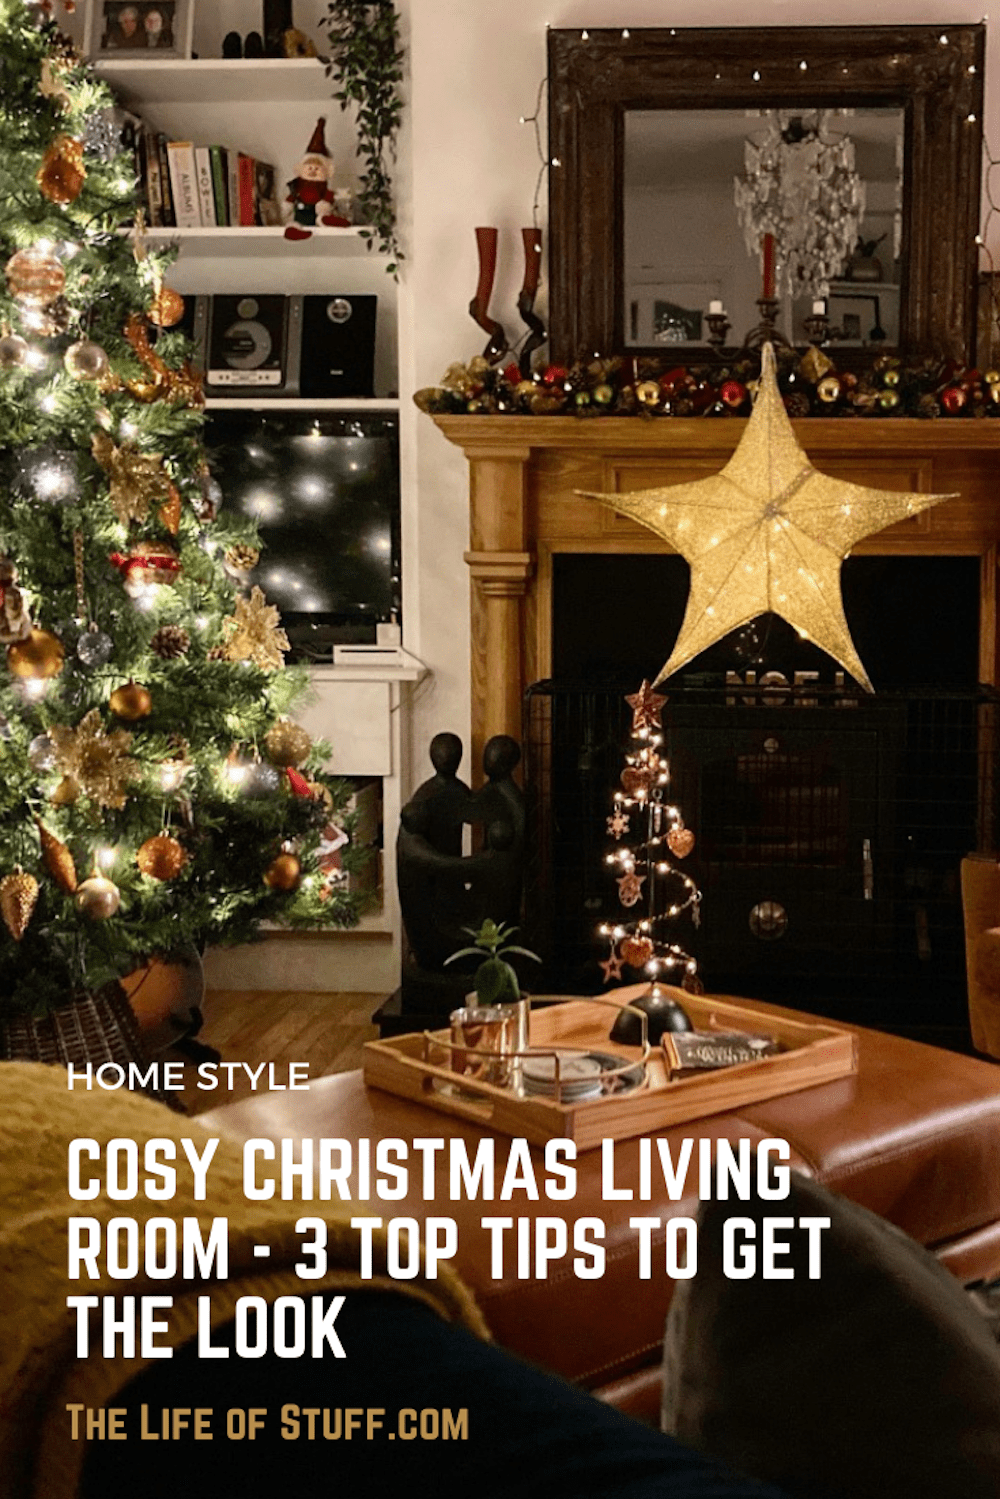 The Life of Stuff - Cosy Christmas Living Room - 3 Top Tips to Get the Look